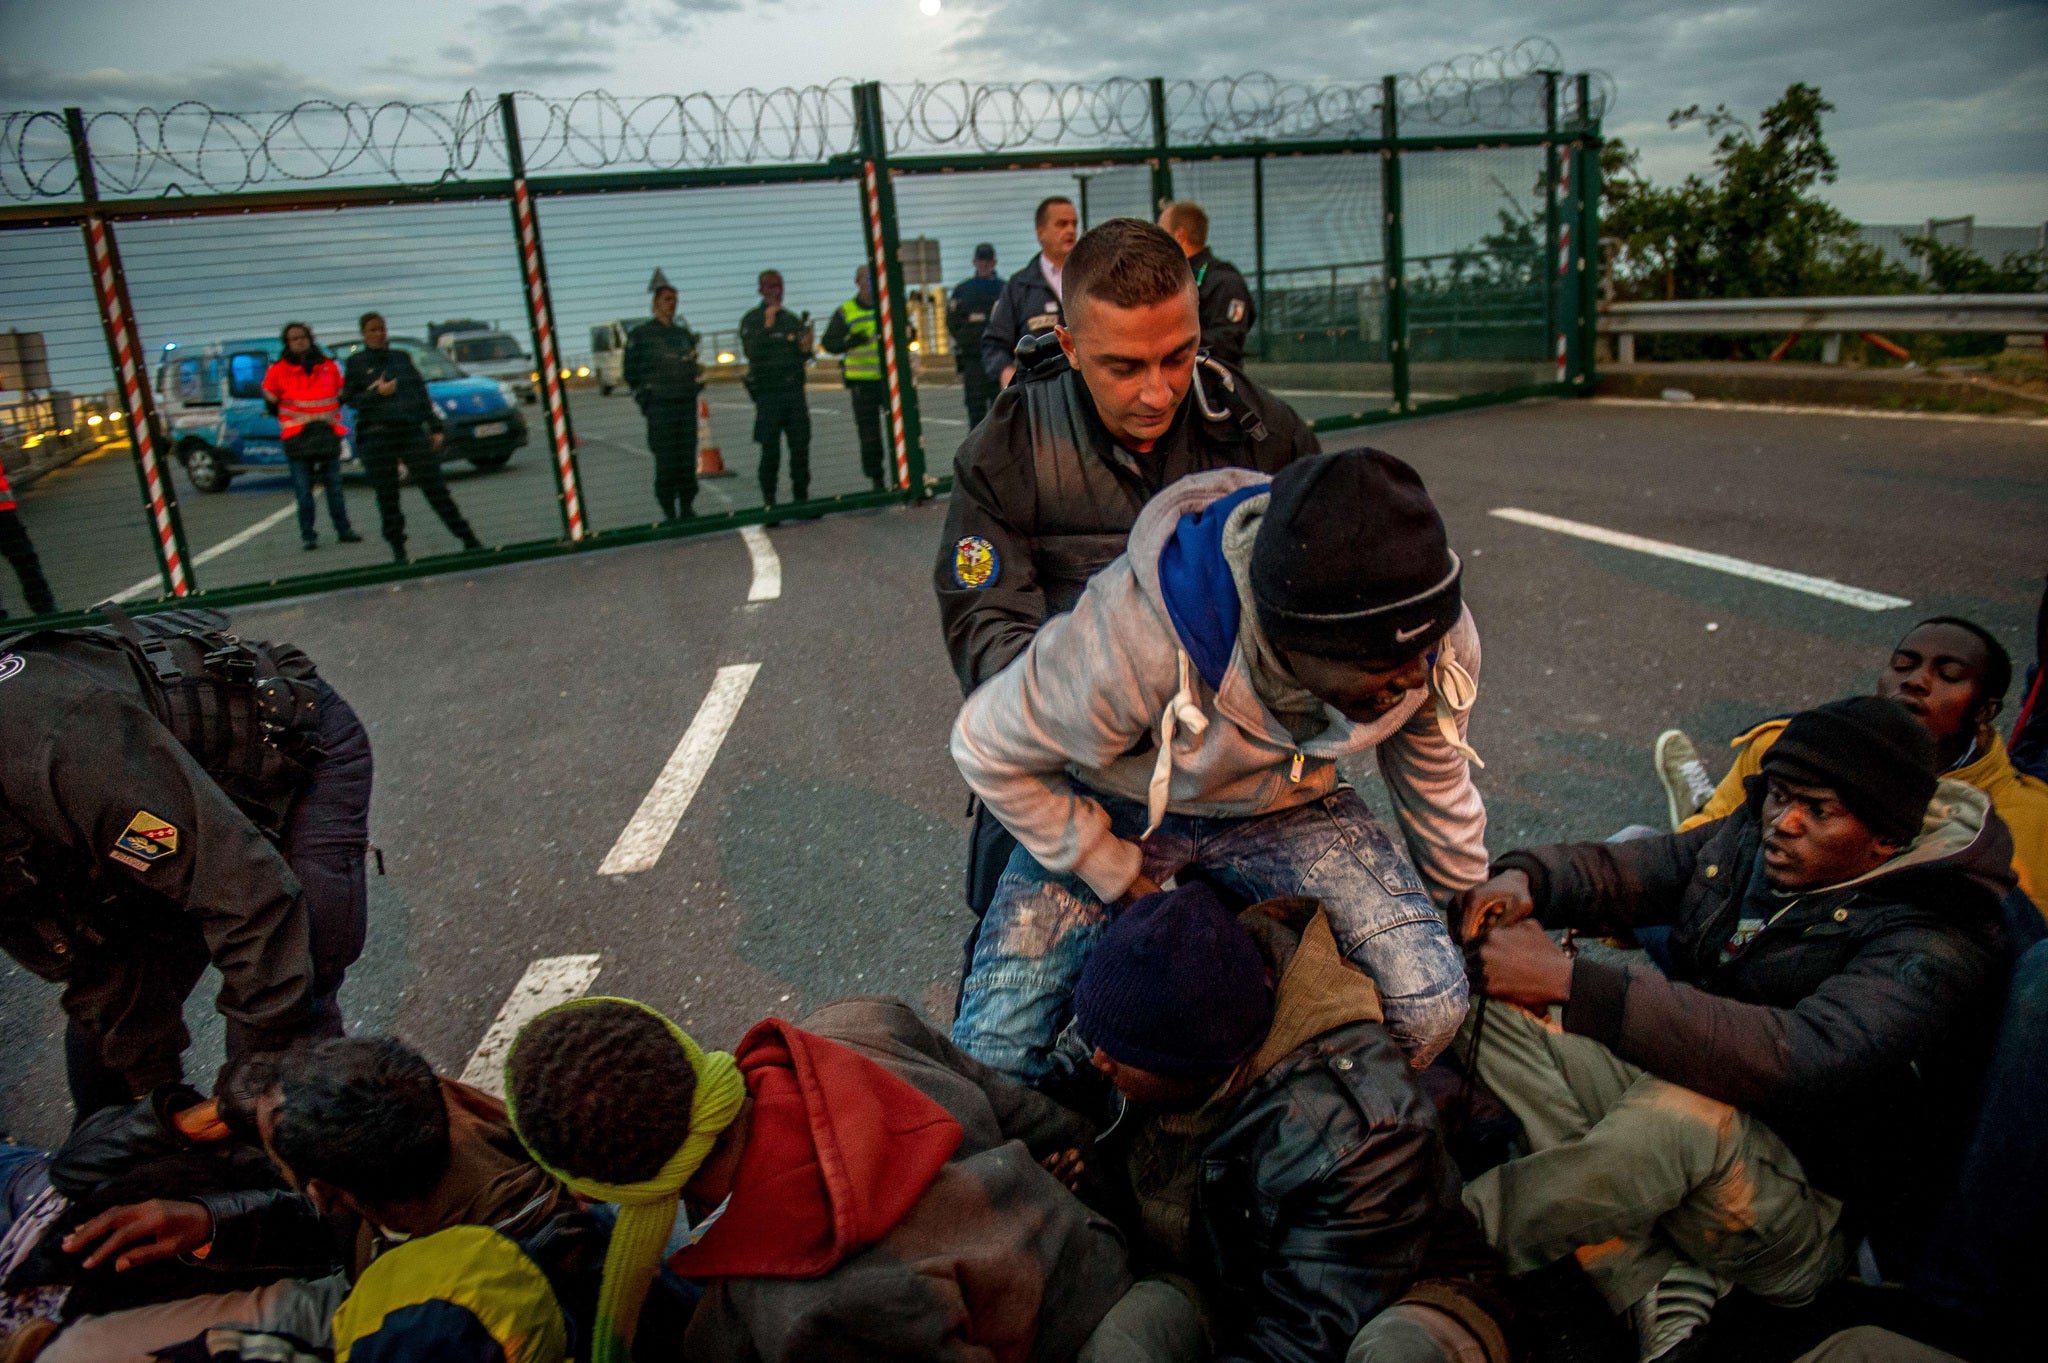 French gendarmes try to separate migrants on the Eurotunnel site near the boarding docks in Coquelles near Calais, northern France, on late July 29, 2015. One man died Wednesday in a desperate attempt to reach England via the Channel Tunnel as overwhelmed